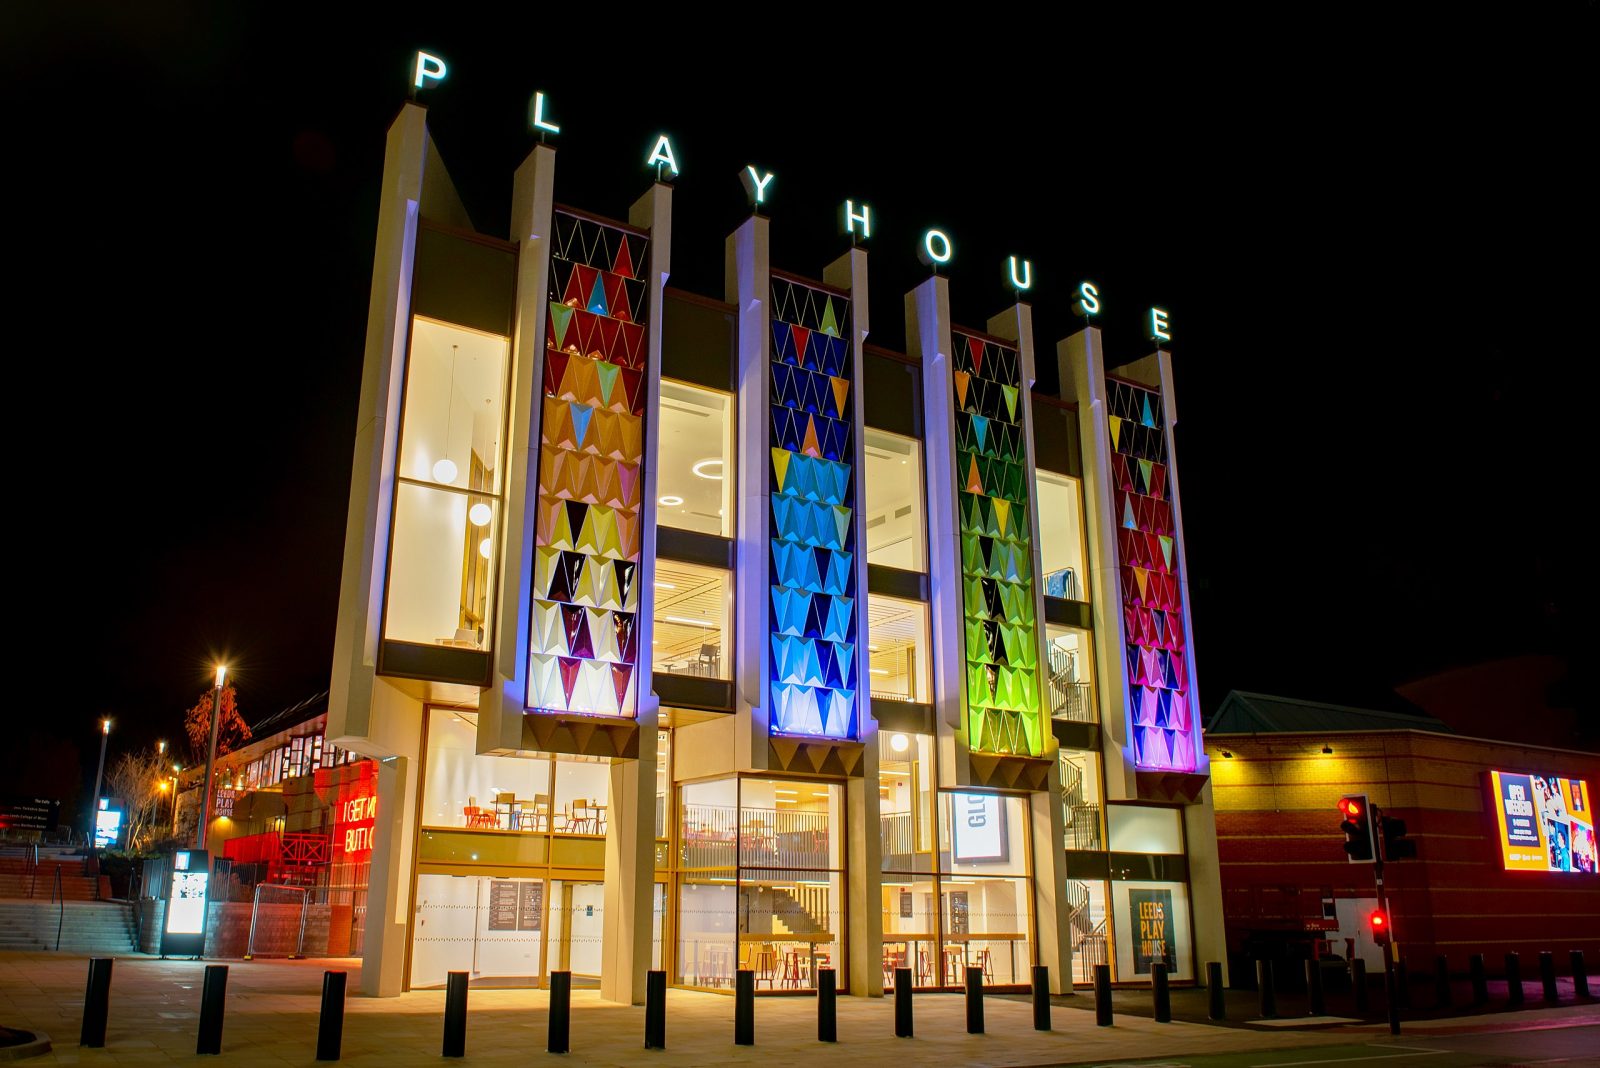 Outside of Leeds Playhouse building with rainbow coloured pillars and sign spelling 'playhouse' out.